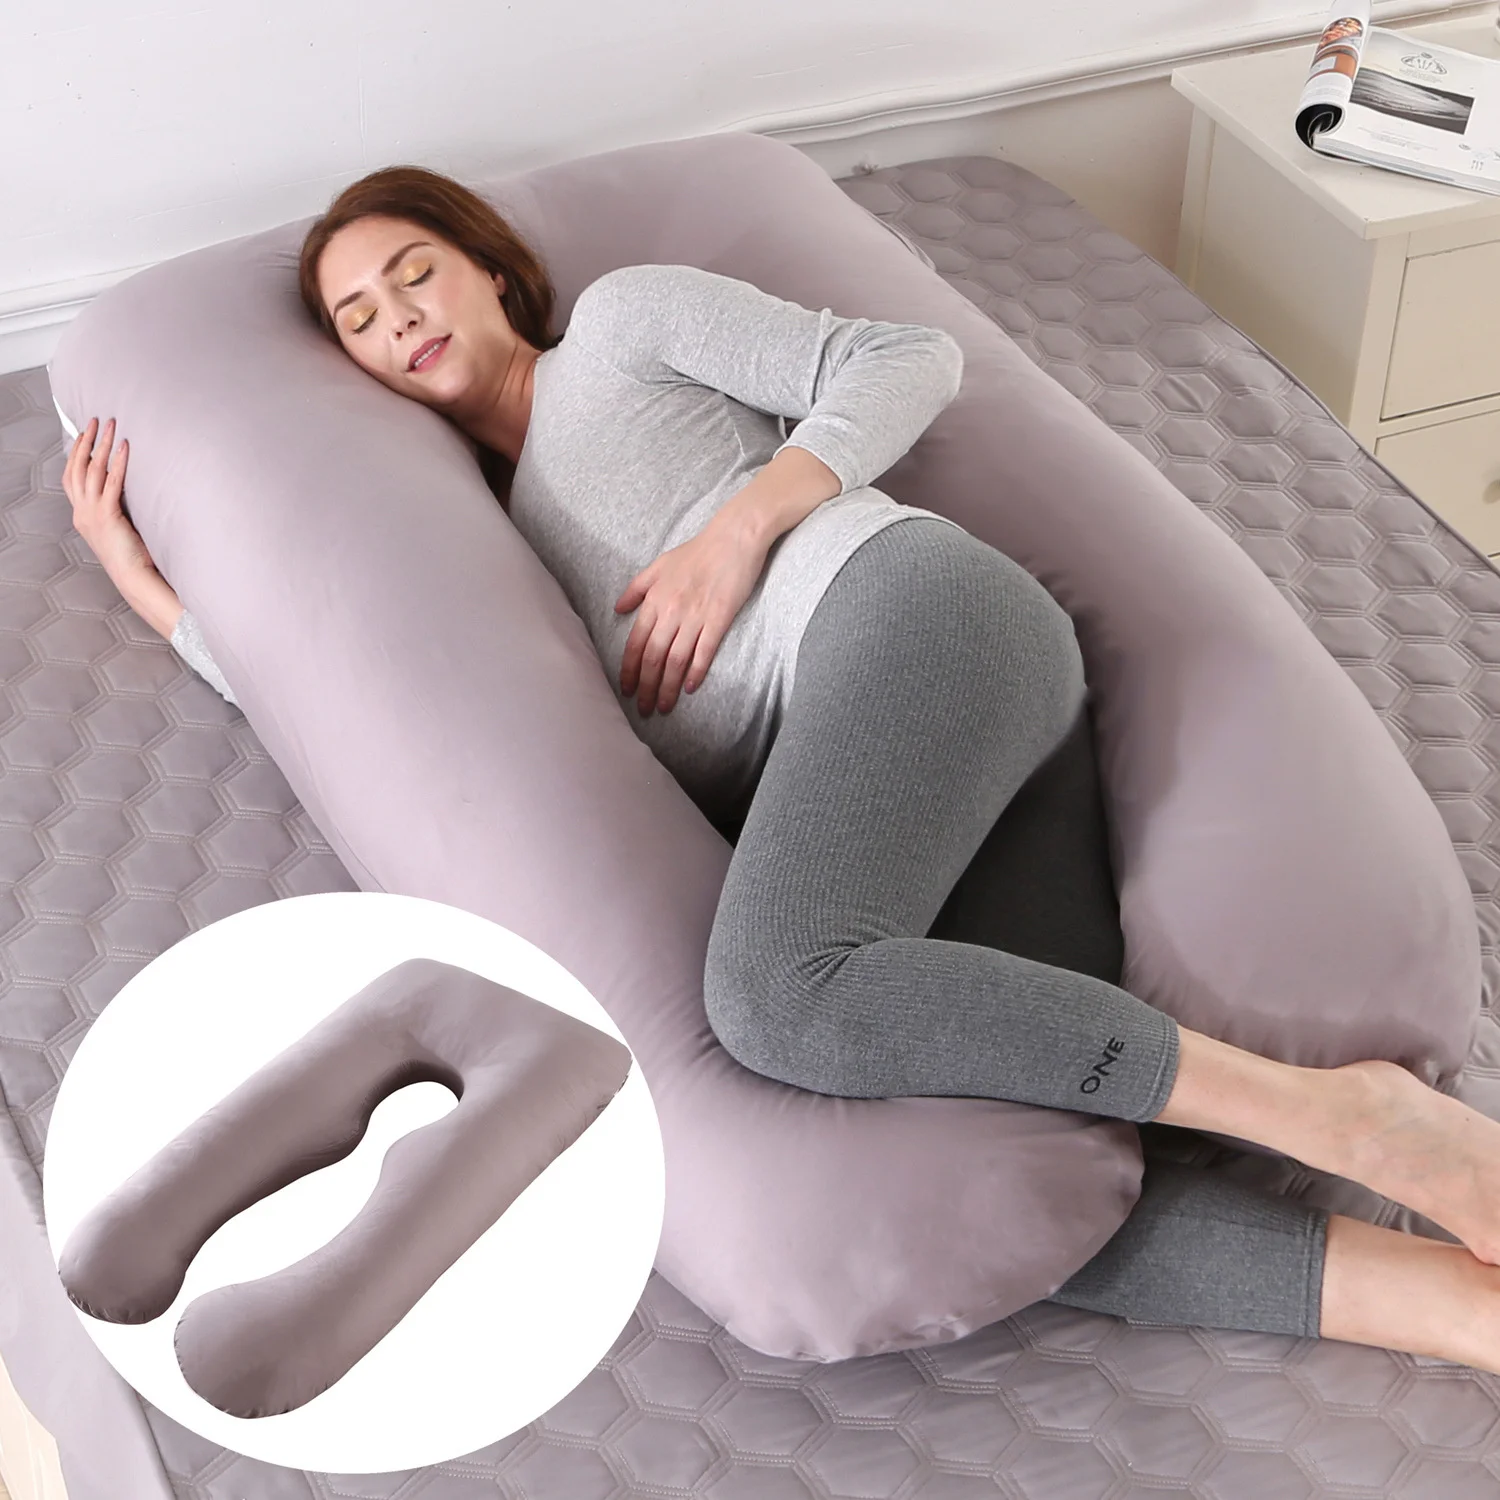 https://ae01.alicdn.com/kf/S0d18895a6d0d4b1497e59aa9f75f326e0/2022-70x130CM-New-Full-Body-Nursing-Pregnancy-Pillow-U-Shaped-Maternity-For-Sleeping-With-Removable-Cotton.jpg